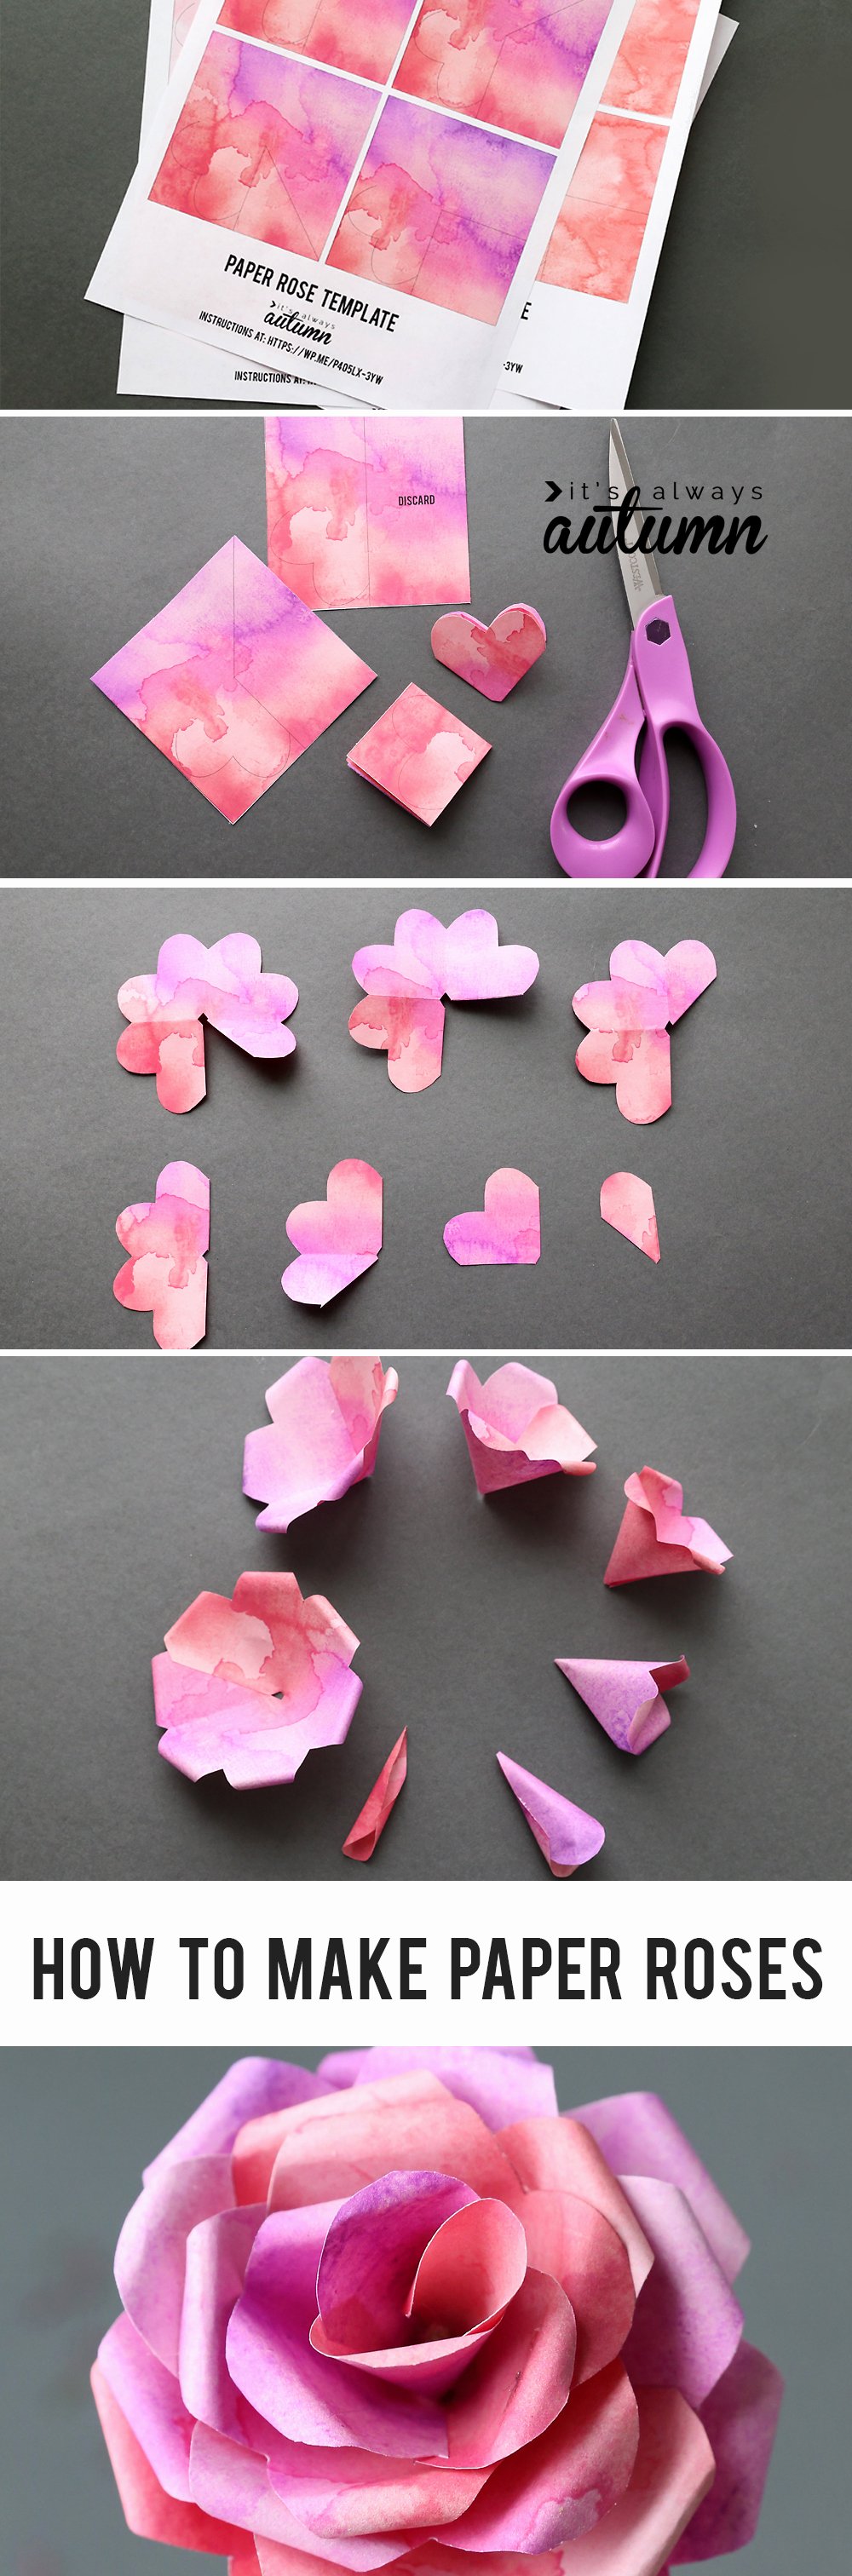 Printable Paper Flower Templates Lovely Make Gorgeous Paper Roses with This Free Paper Rose